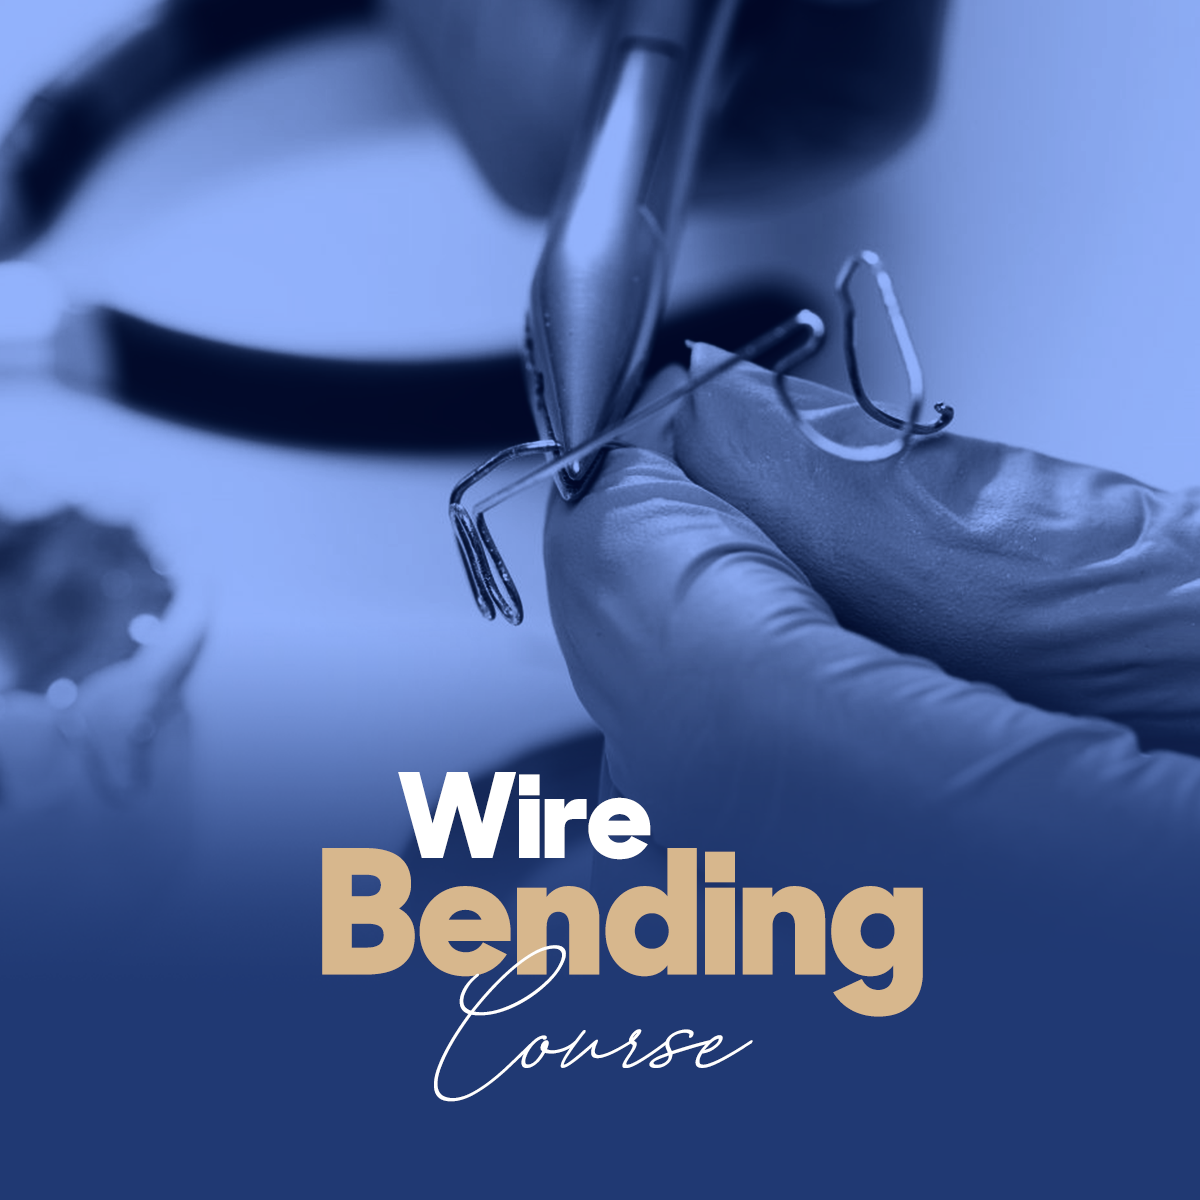 Perfect Braces Academy - Wire Bending Course